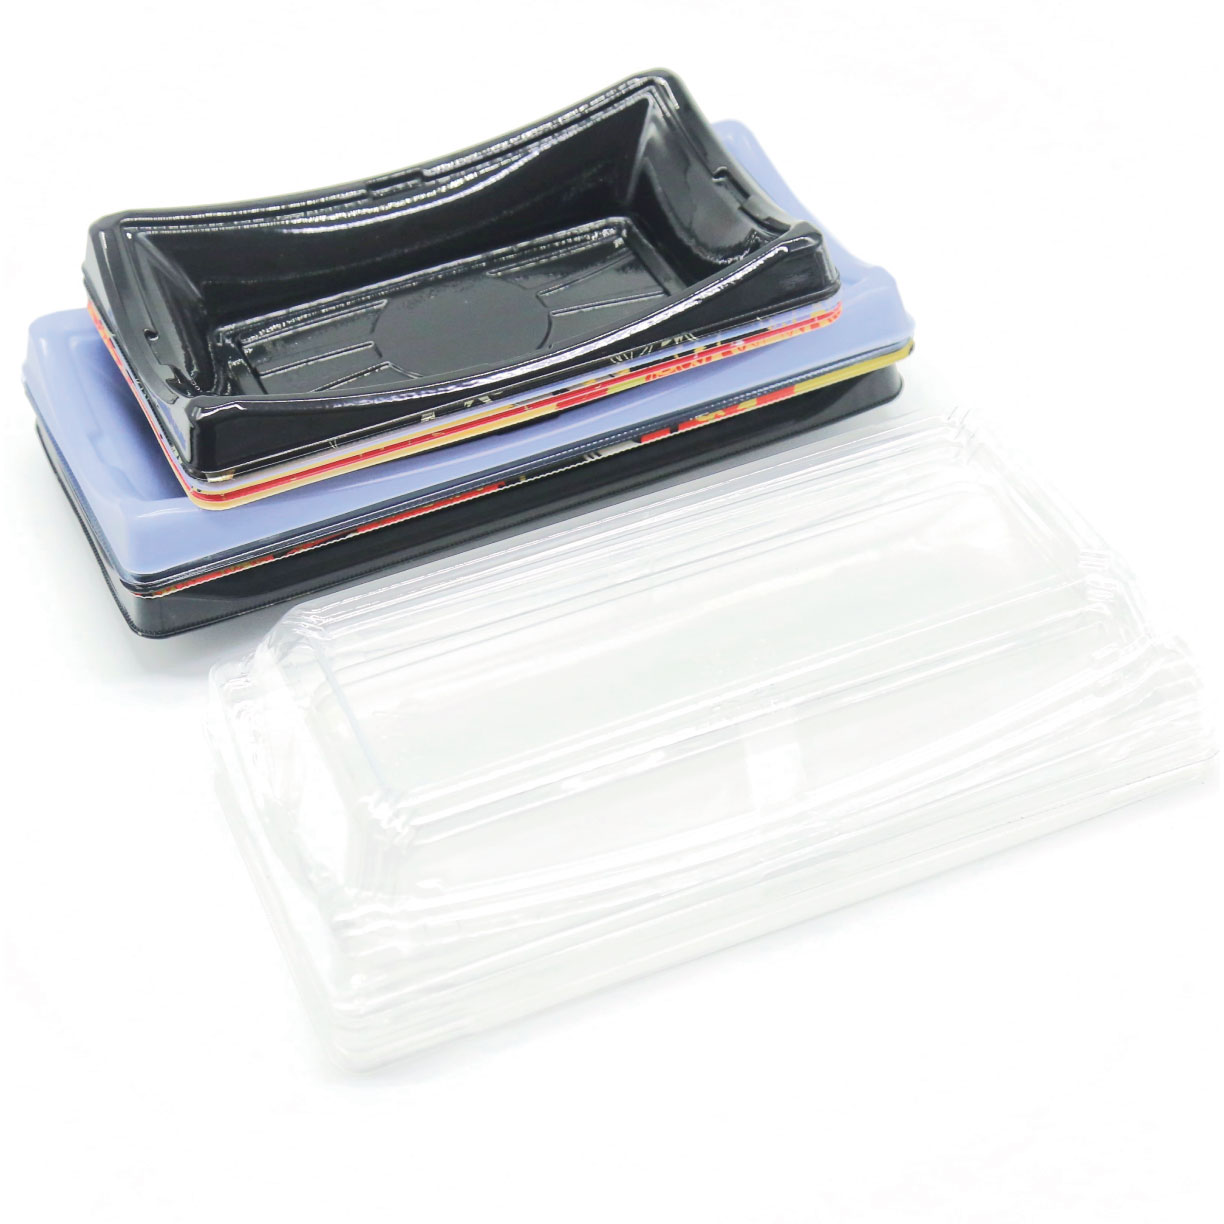 The sushi tray WL-B09 is stackable for easy storage and placement.